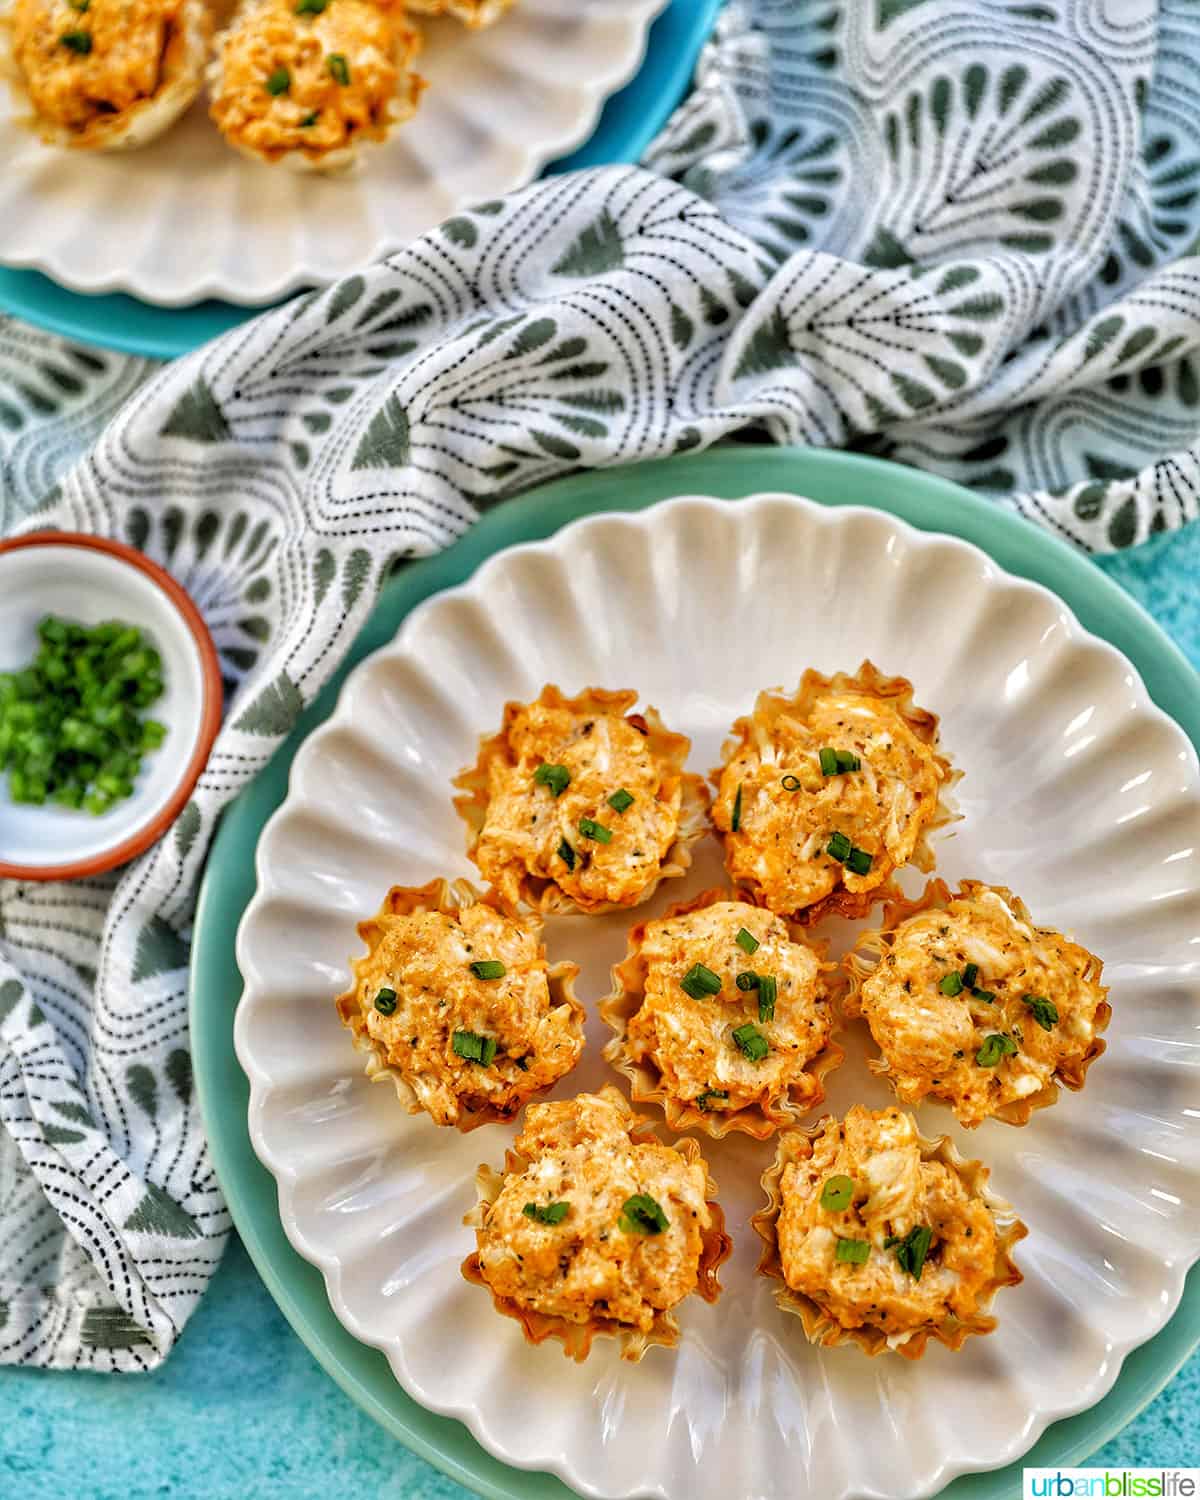 several buffalo chicken bites with chopped green onions on plates with a green and white napkin.